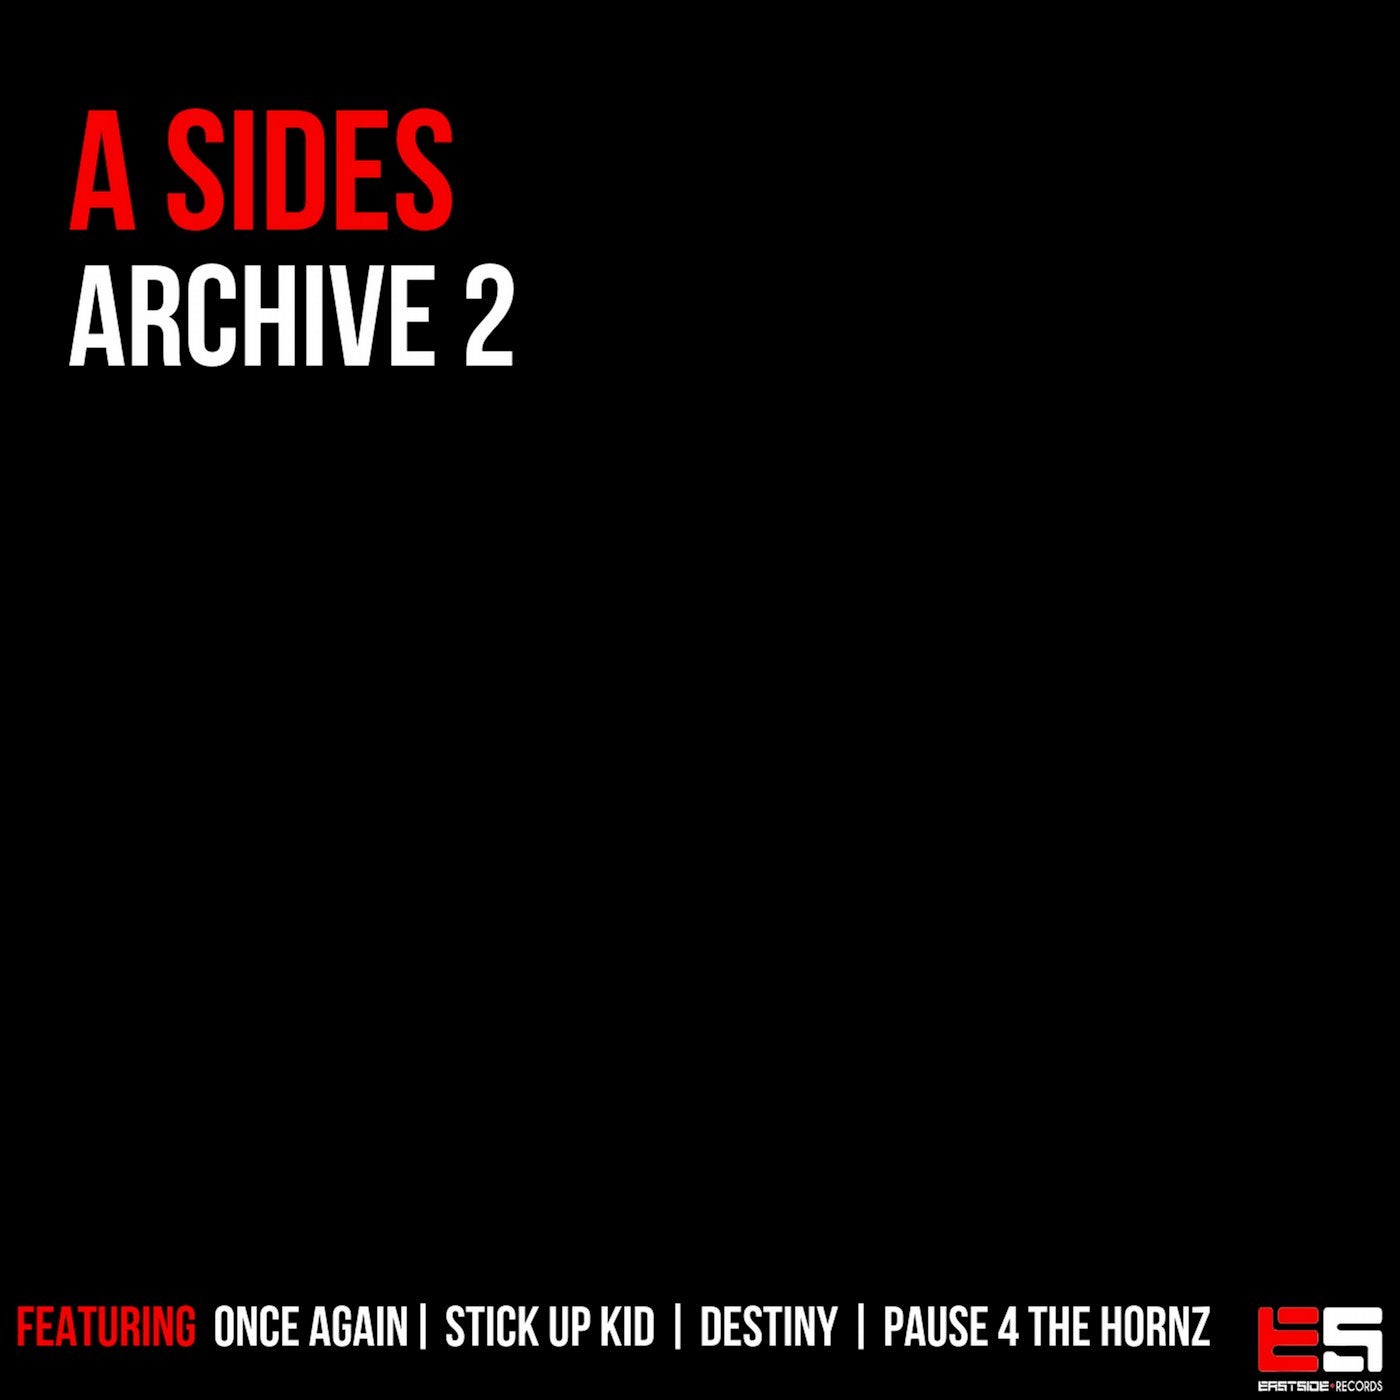 Archive 2 (2019 Remasters)